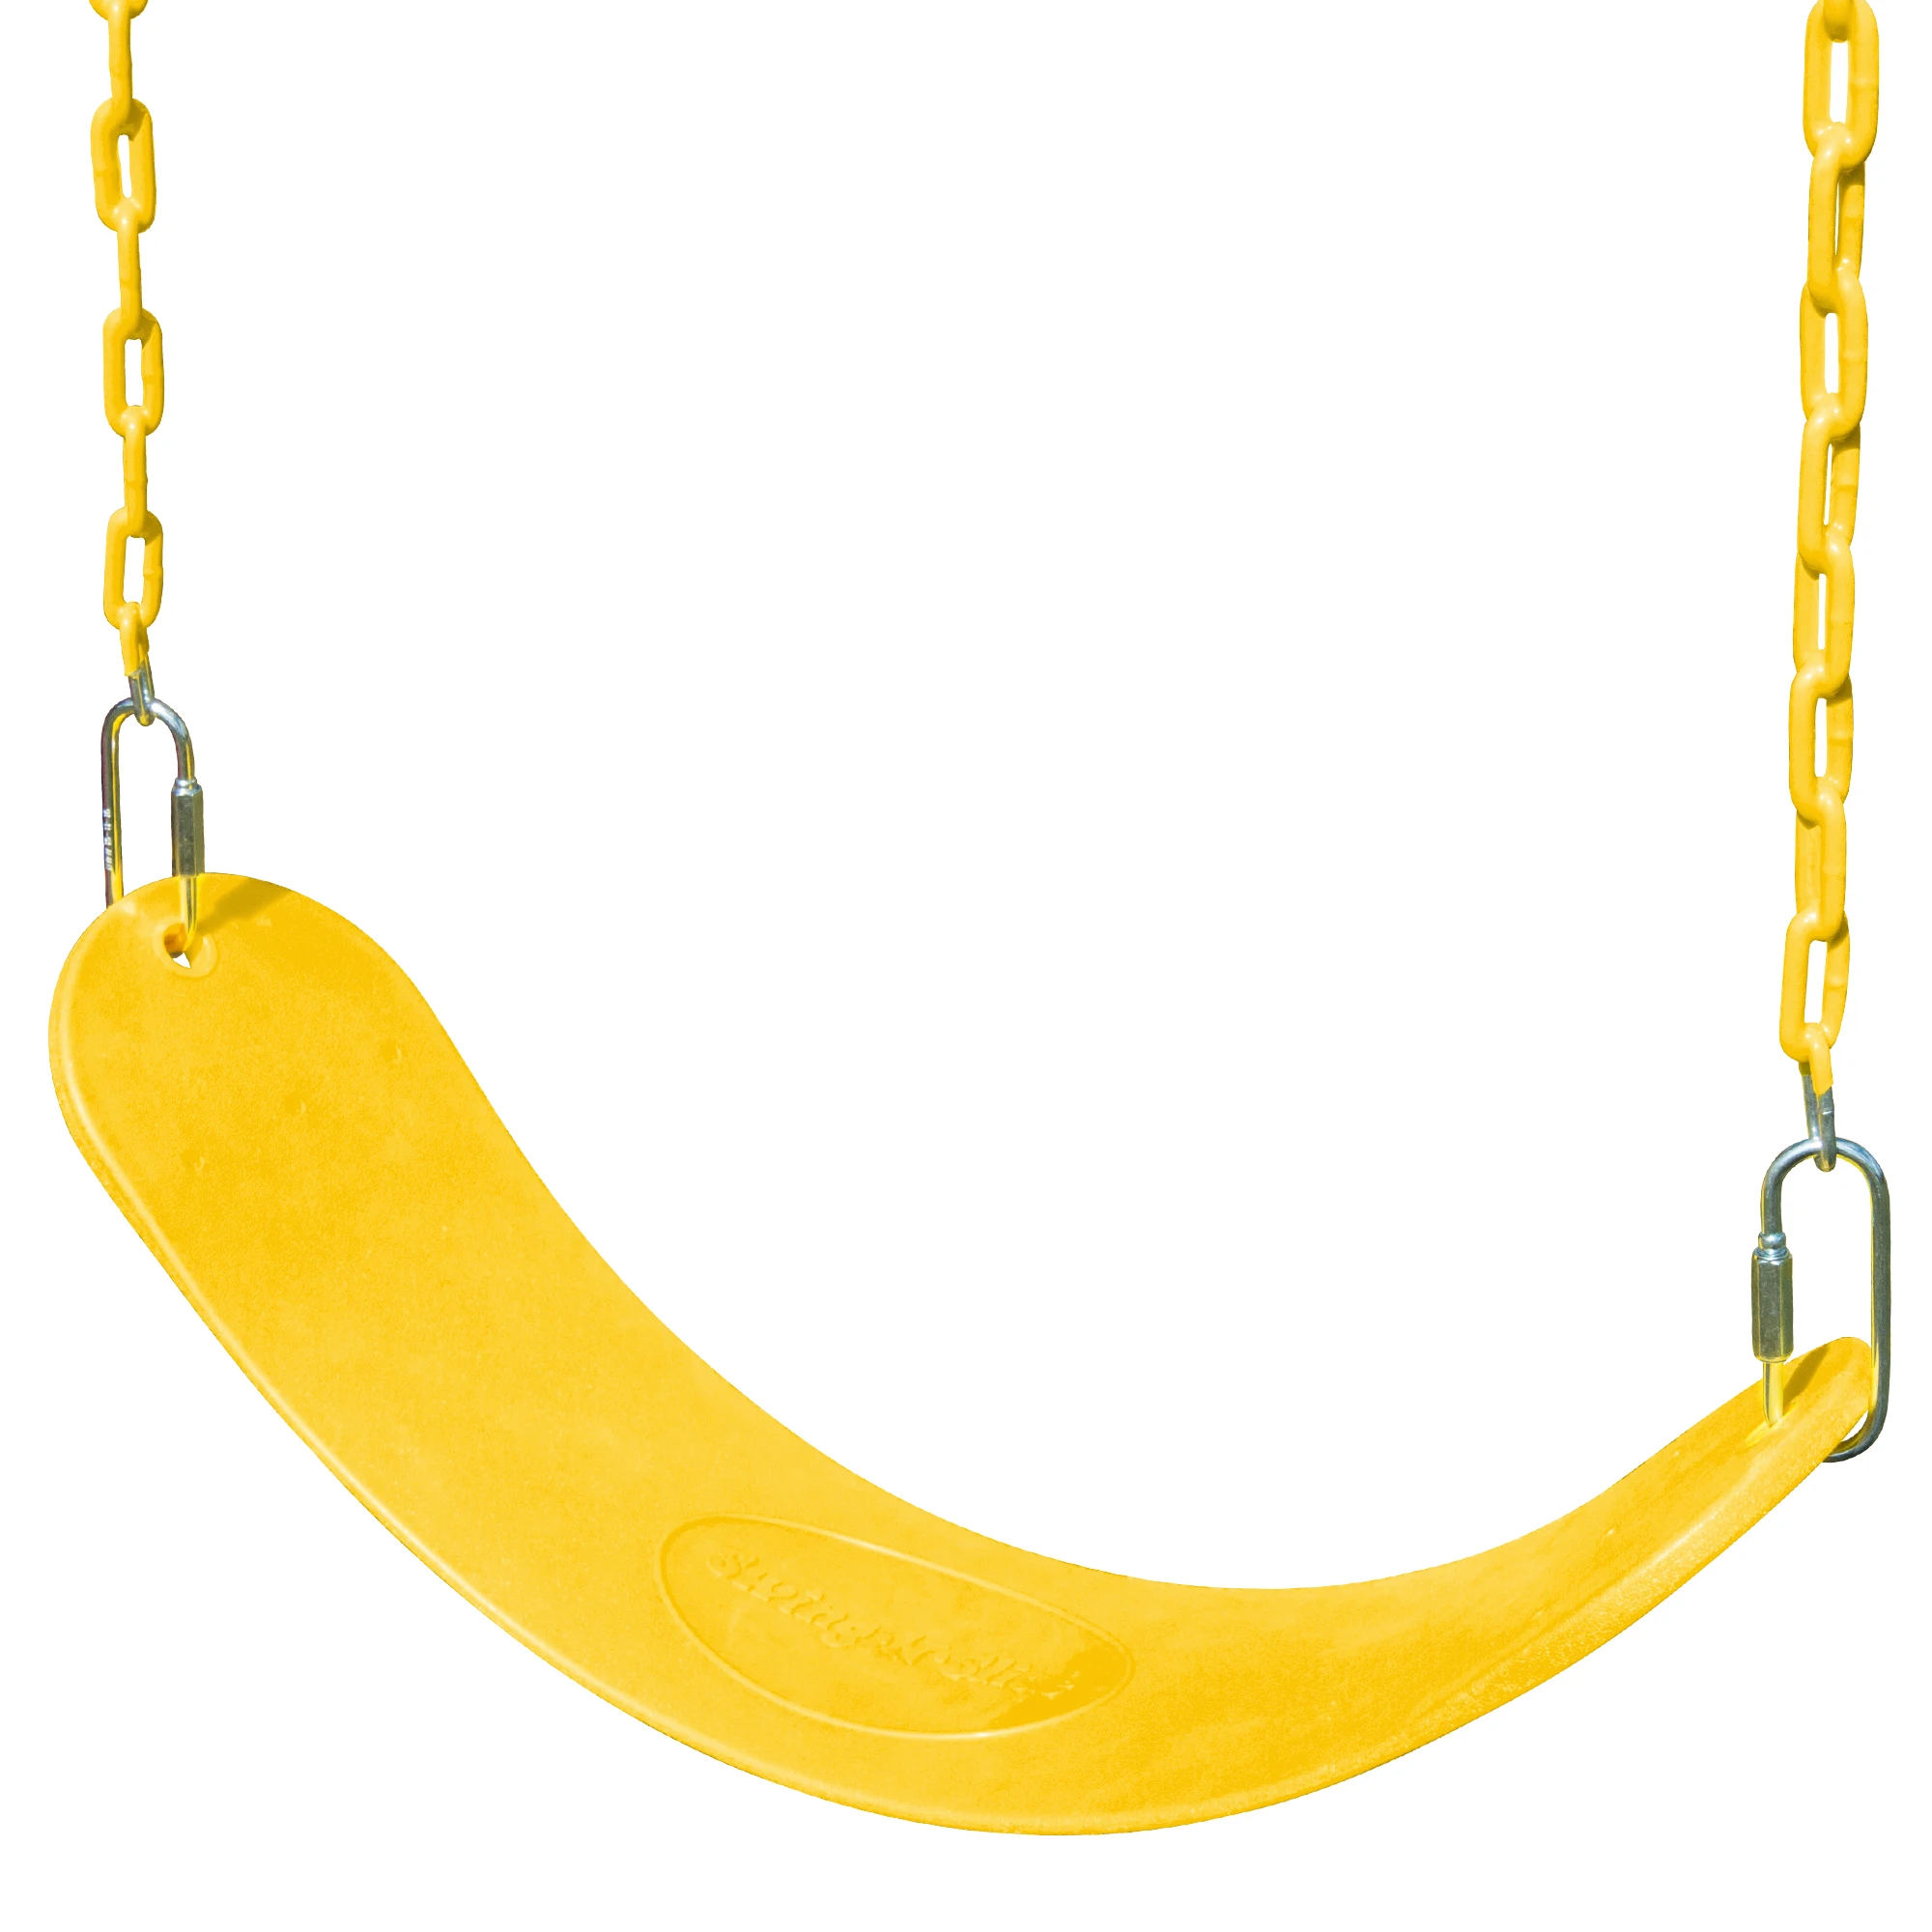 2 Yellow Swing Seats and Ring/Trapeze Bar Combo enlarge